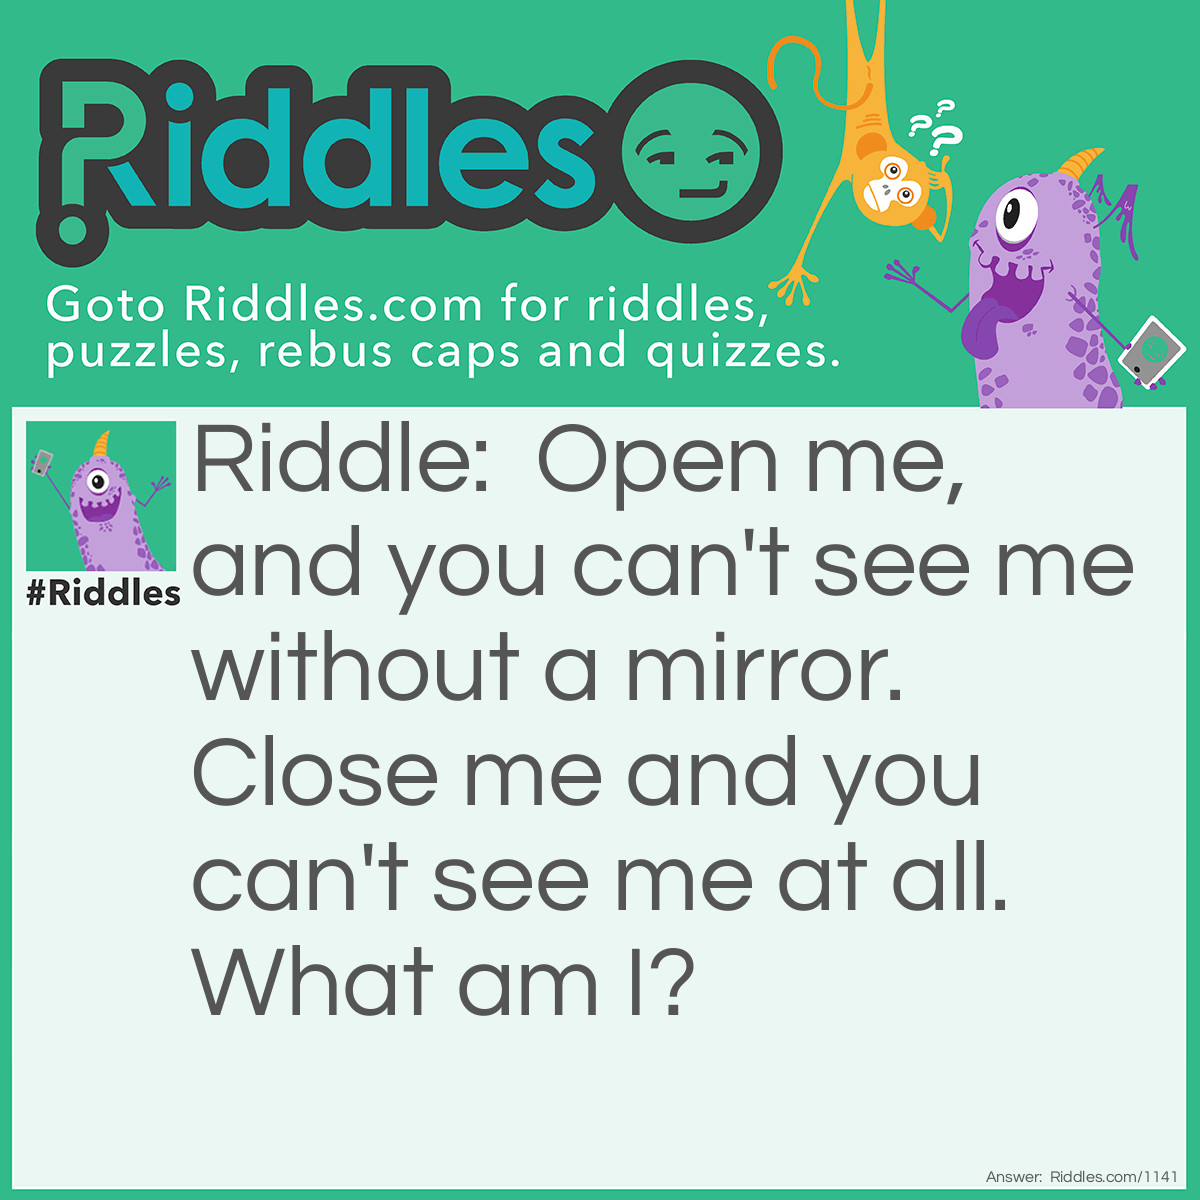 Riddle: Open me, and you can't see me without a mirror. Close me and you can't see me at all.
What am I? Answer: Your eyes.